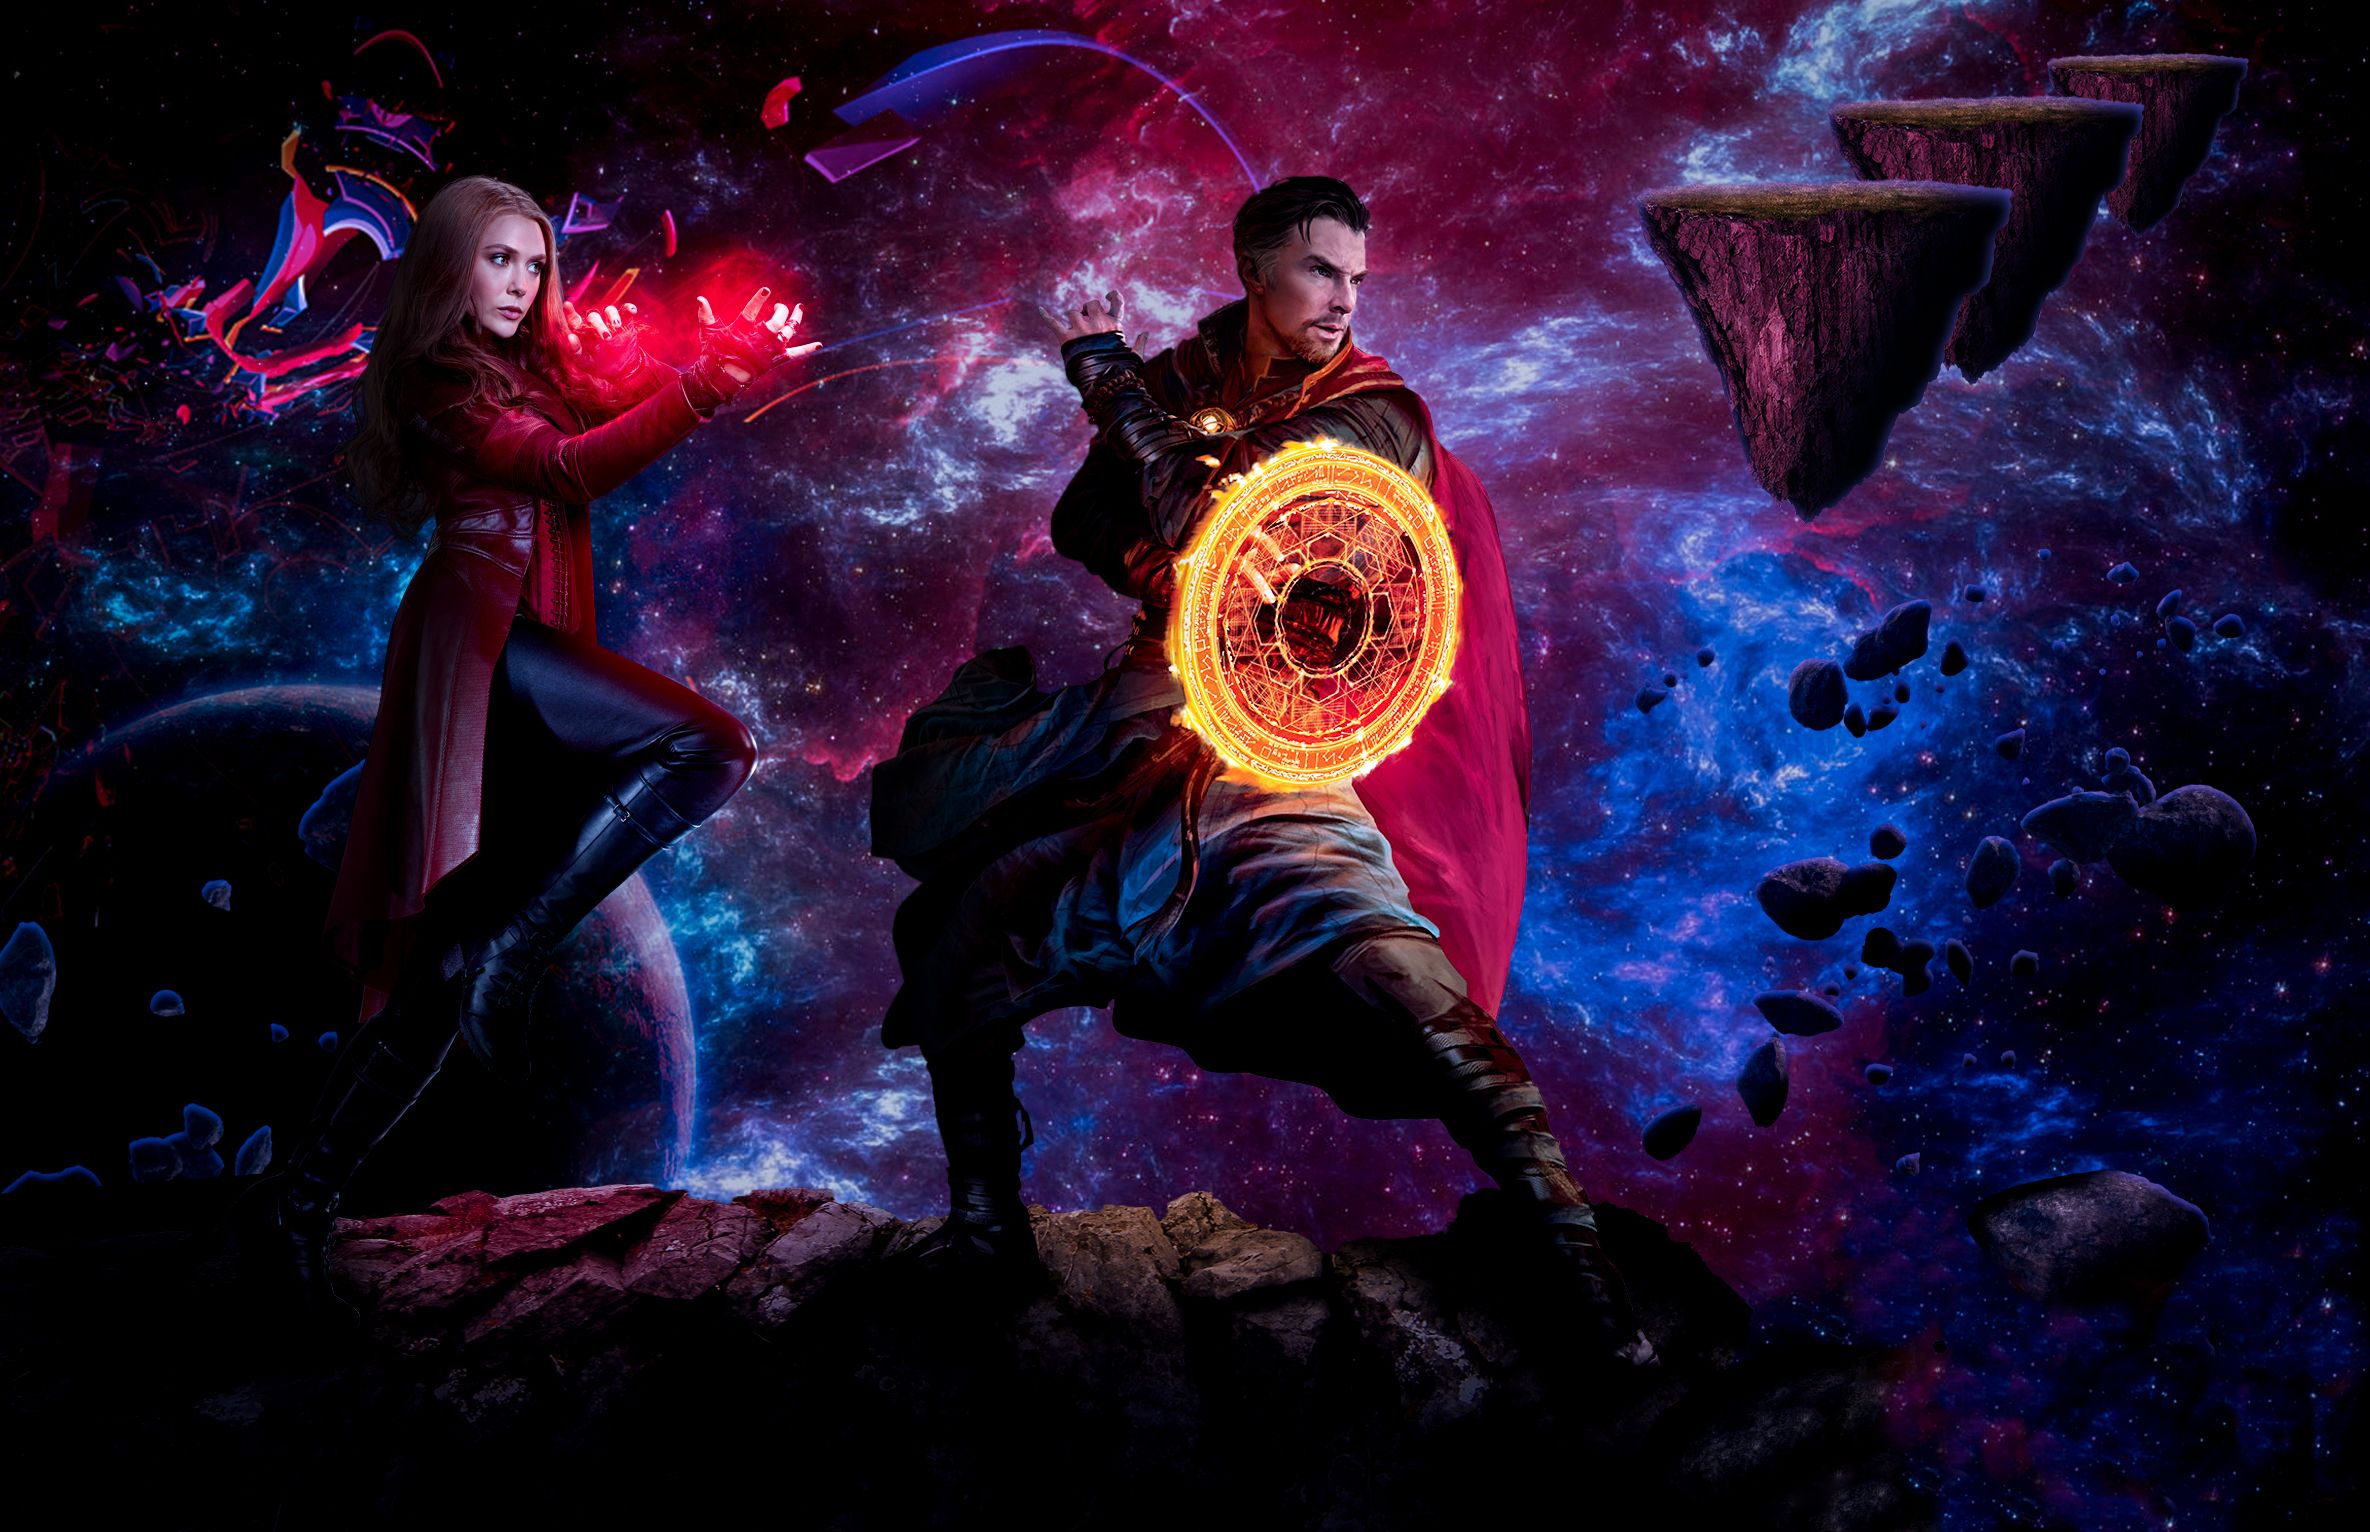 Doctor Strange and Scarlet Witch Madness of multiverse Art Wallpaper, HD Movies 4K Wallpaper, Image, Photo and Background